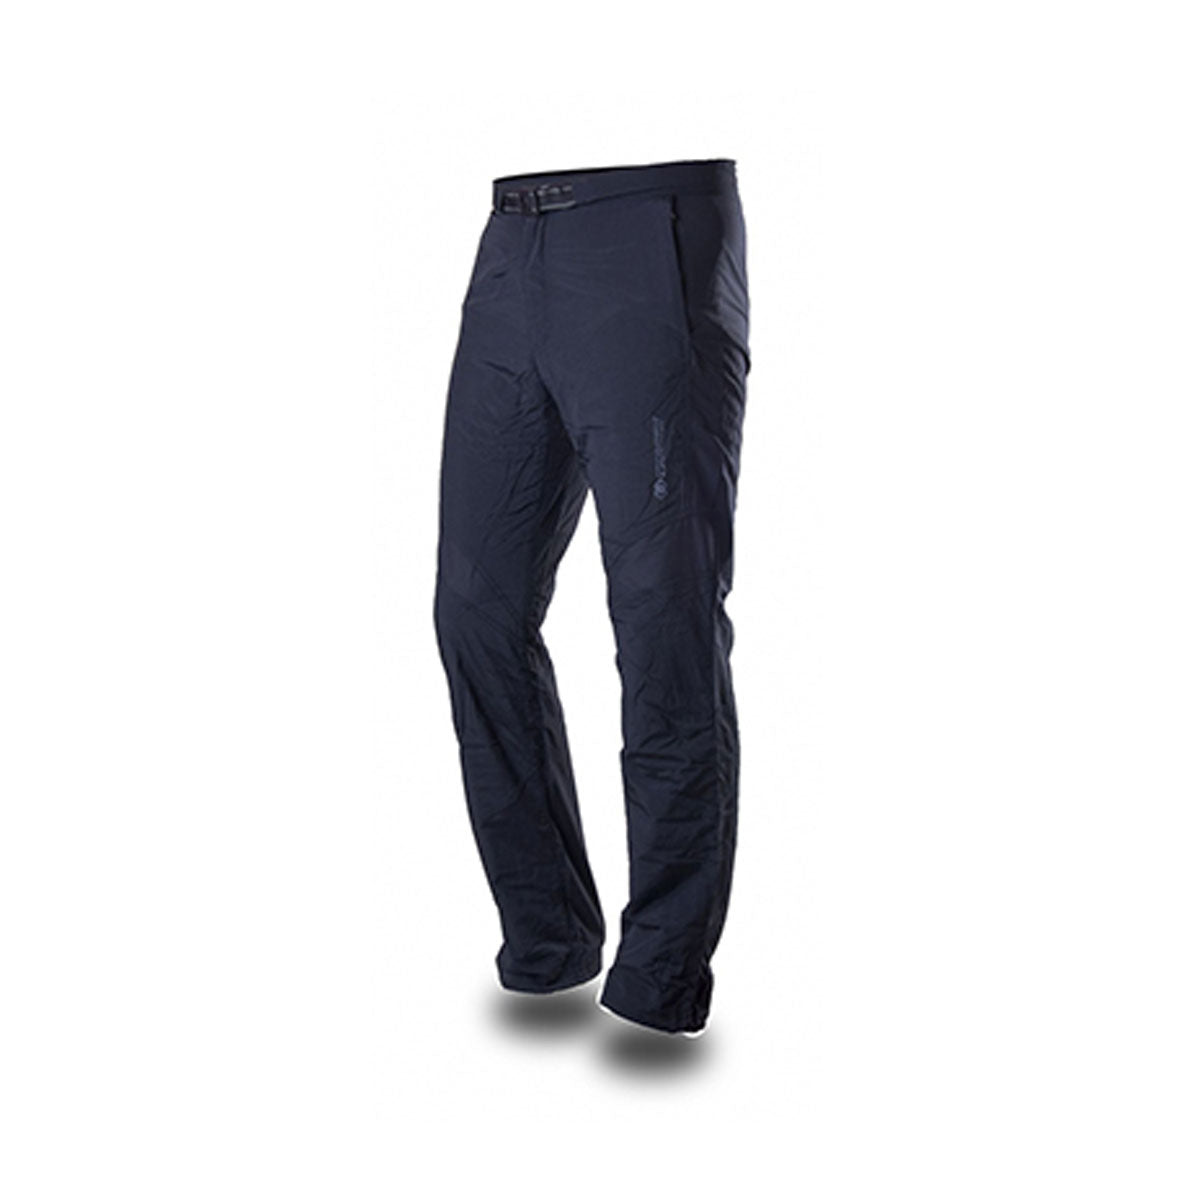 Trimm Direct Pants - Adventure Trousers - Outdoor Travel Gear 1